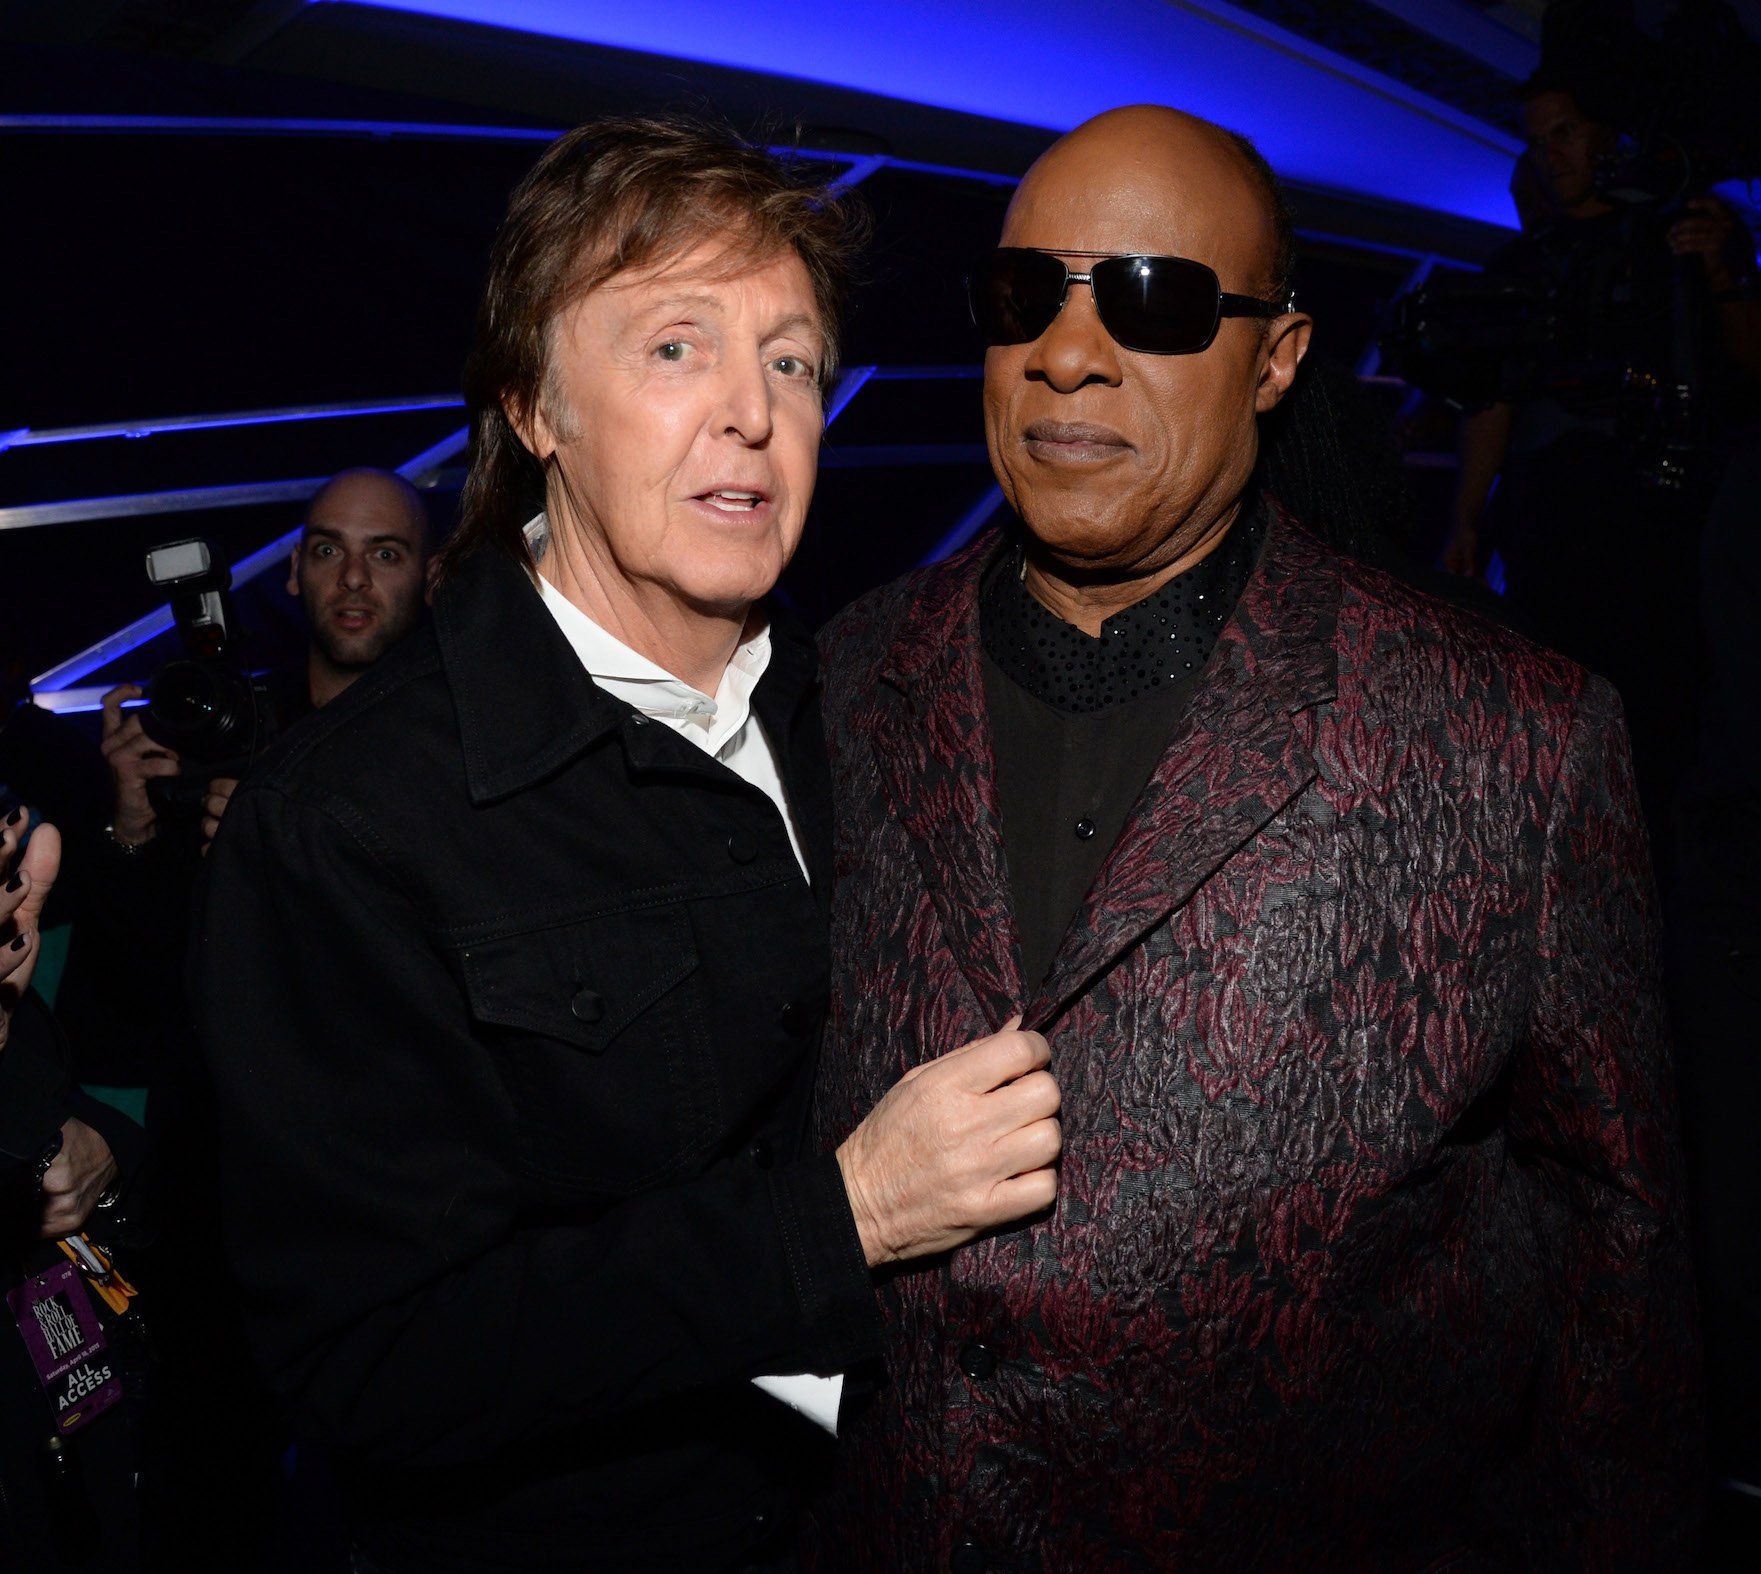 Paul McCartney and Stevie Wonder attend the 30th Annual Rock and Roll Hall of Fame Induction Ceremony